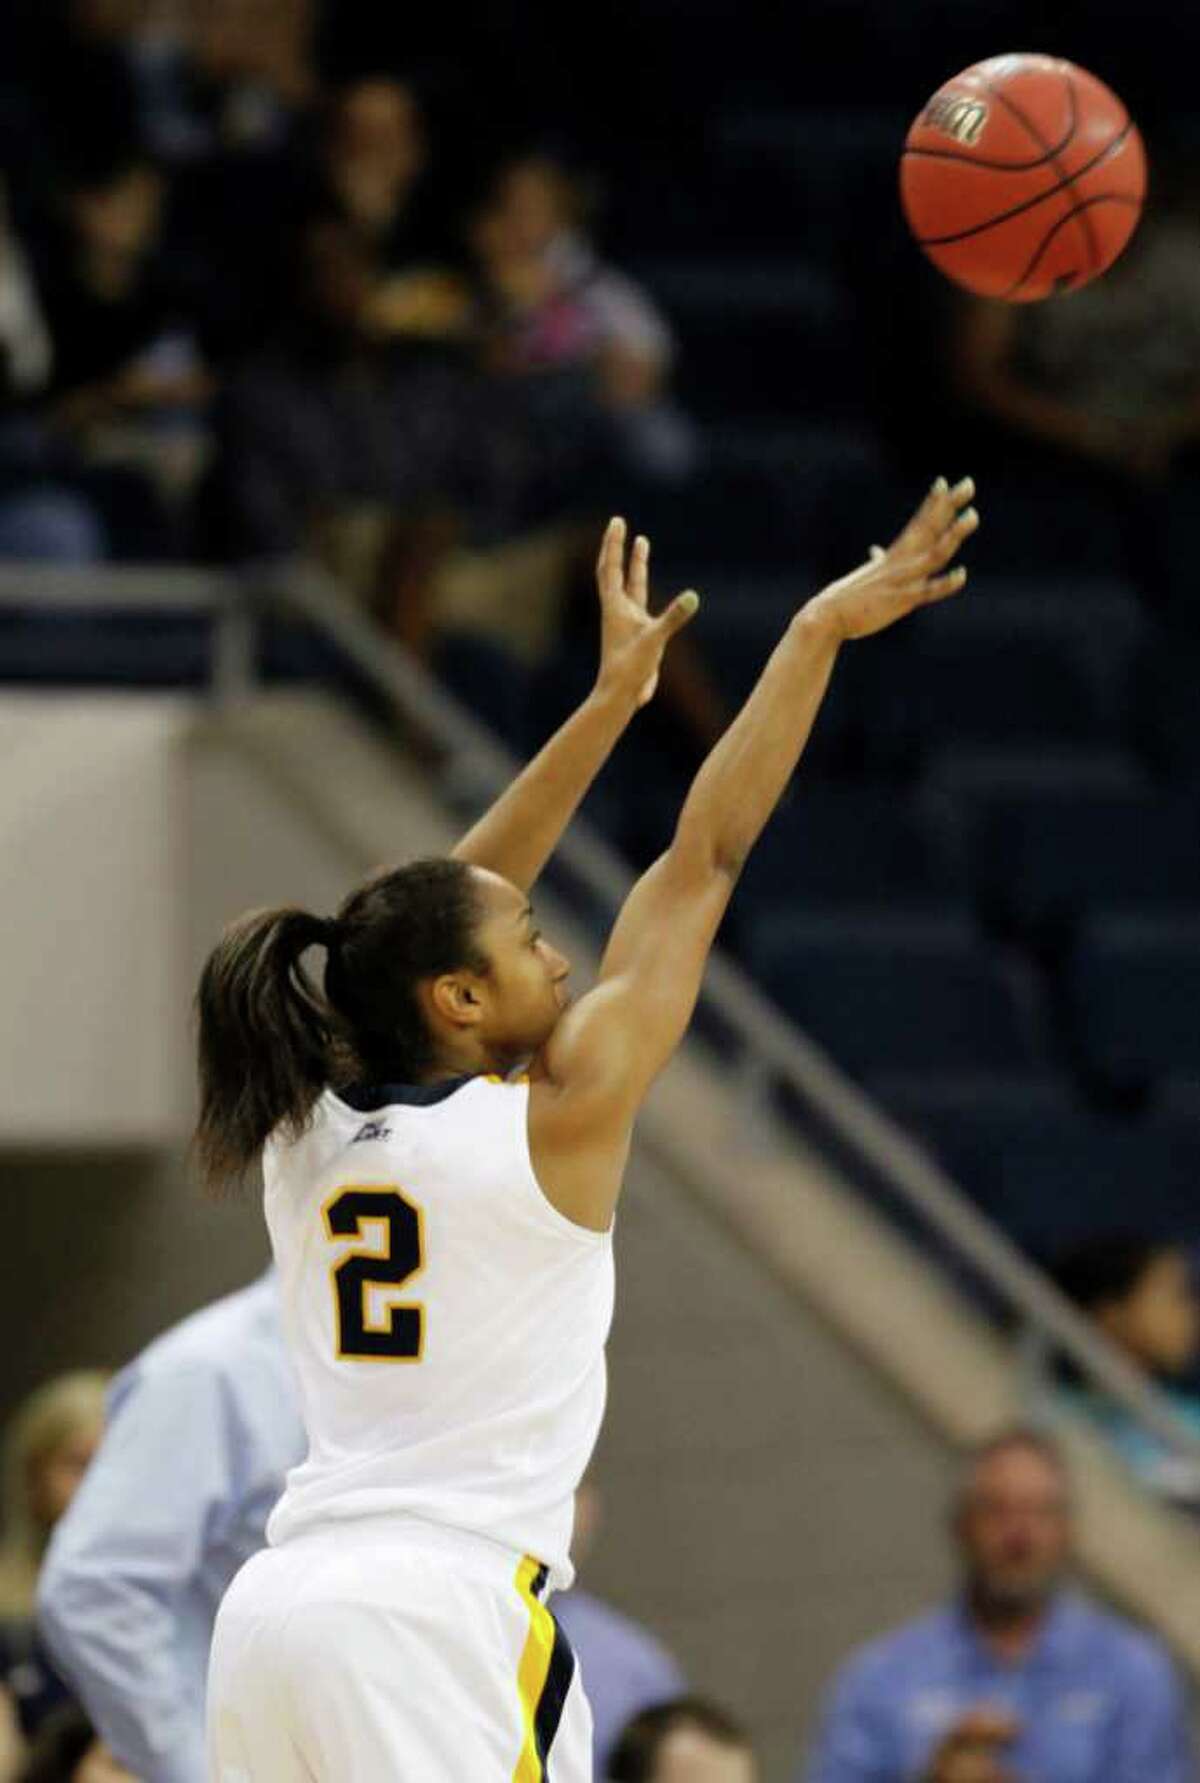 West Virginia guard Taylor Palmer (2) launches a three-point shot during a first-round NCAA tournament women's college basketball game against Texas in Norfolk, Va., Saturday, March 17, 2012. West Virginia won 68-55. (AP Photo/Steve Helber)